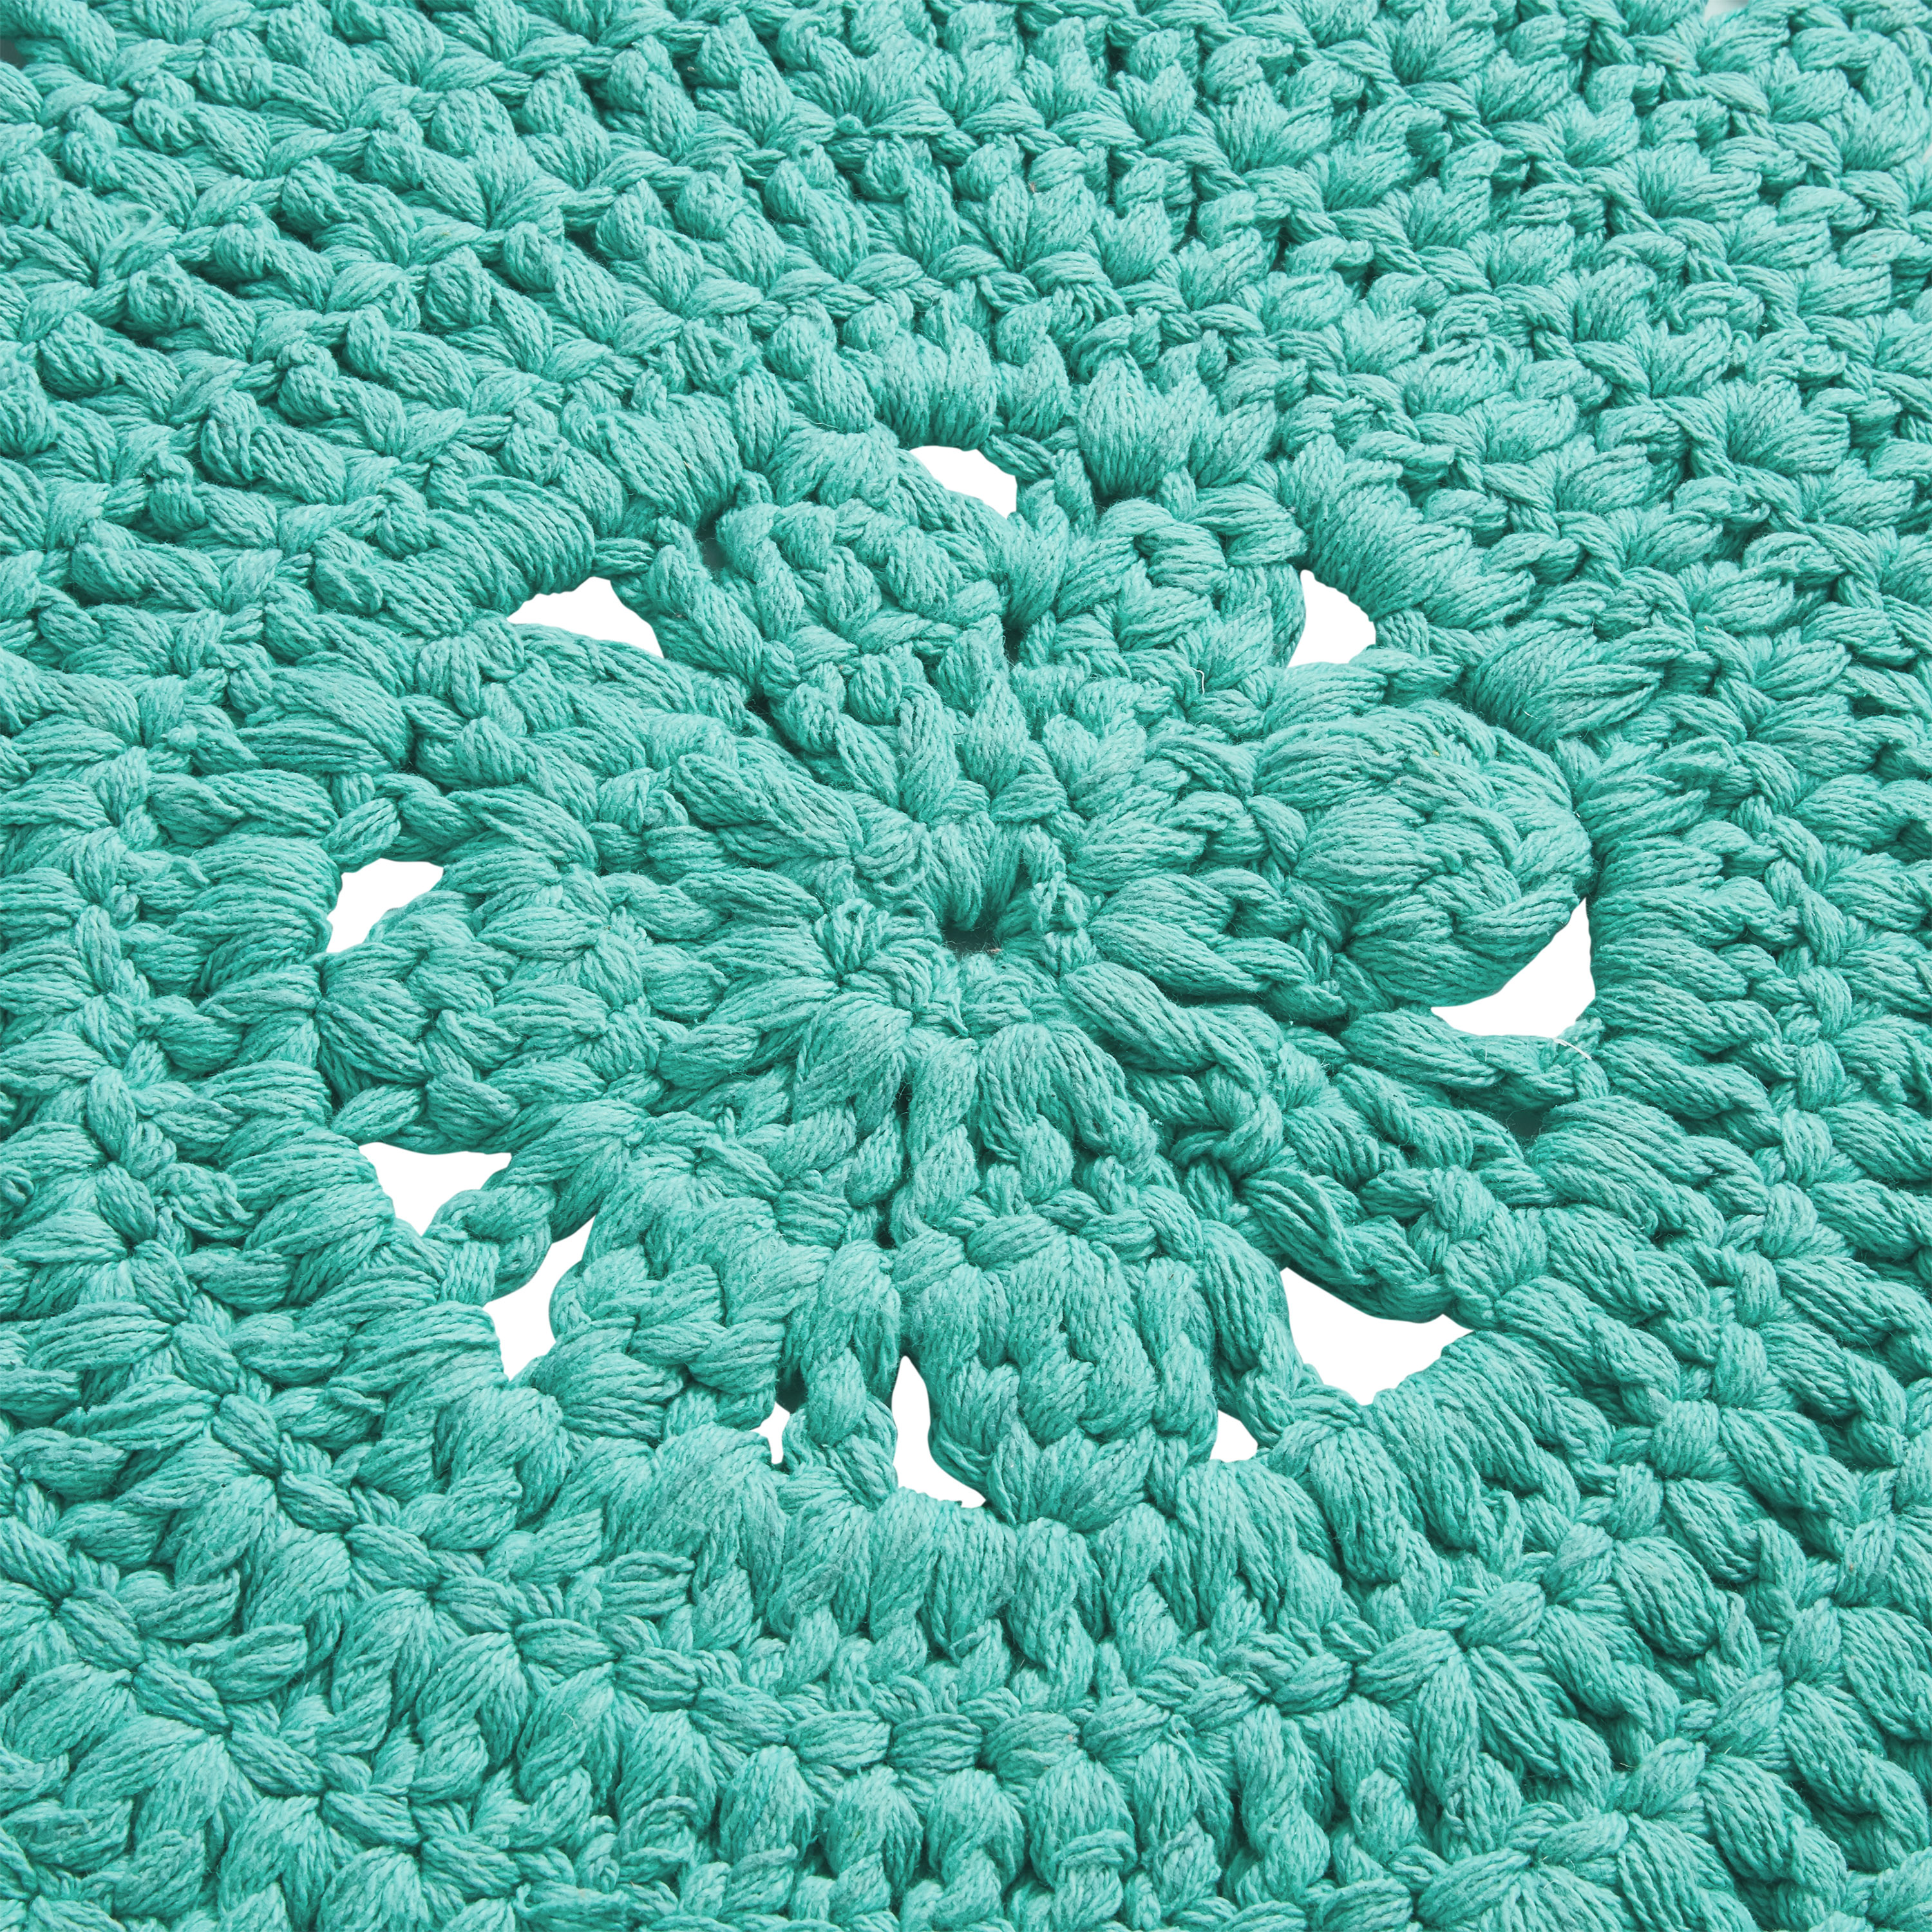 The Pioneer Woman Round Cotton Crochet Accent Rug, Teal - image 4 of 5